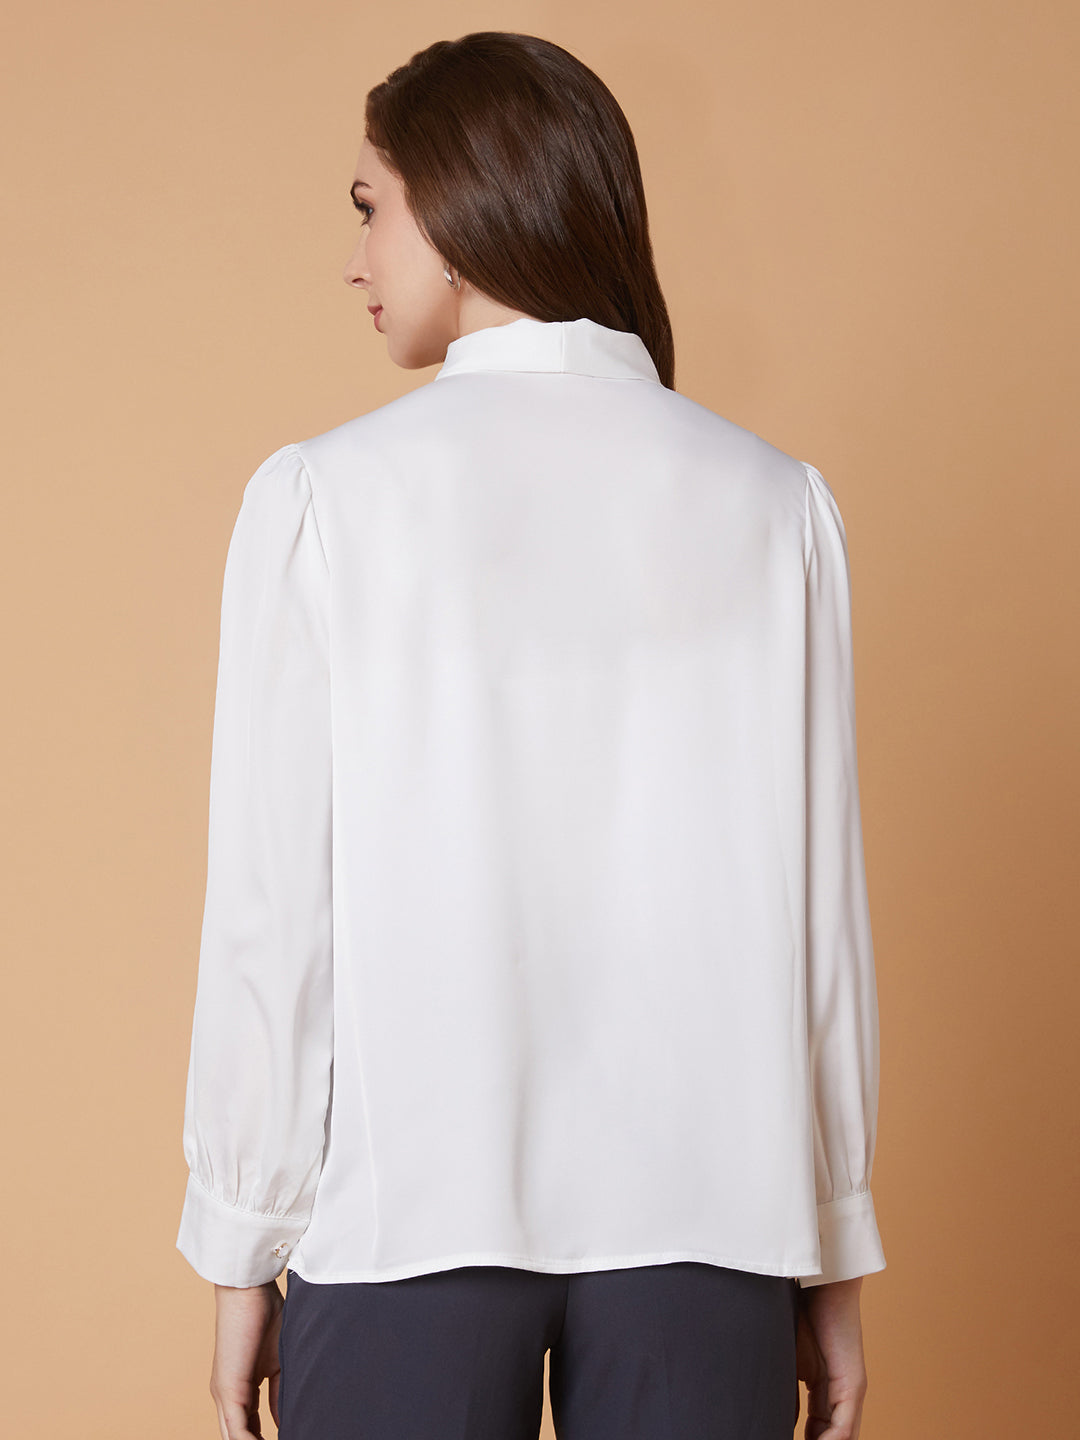 Women Solid White Shirt Style Top